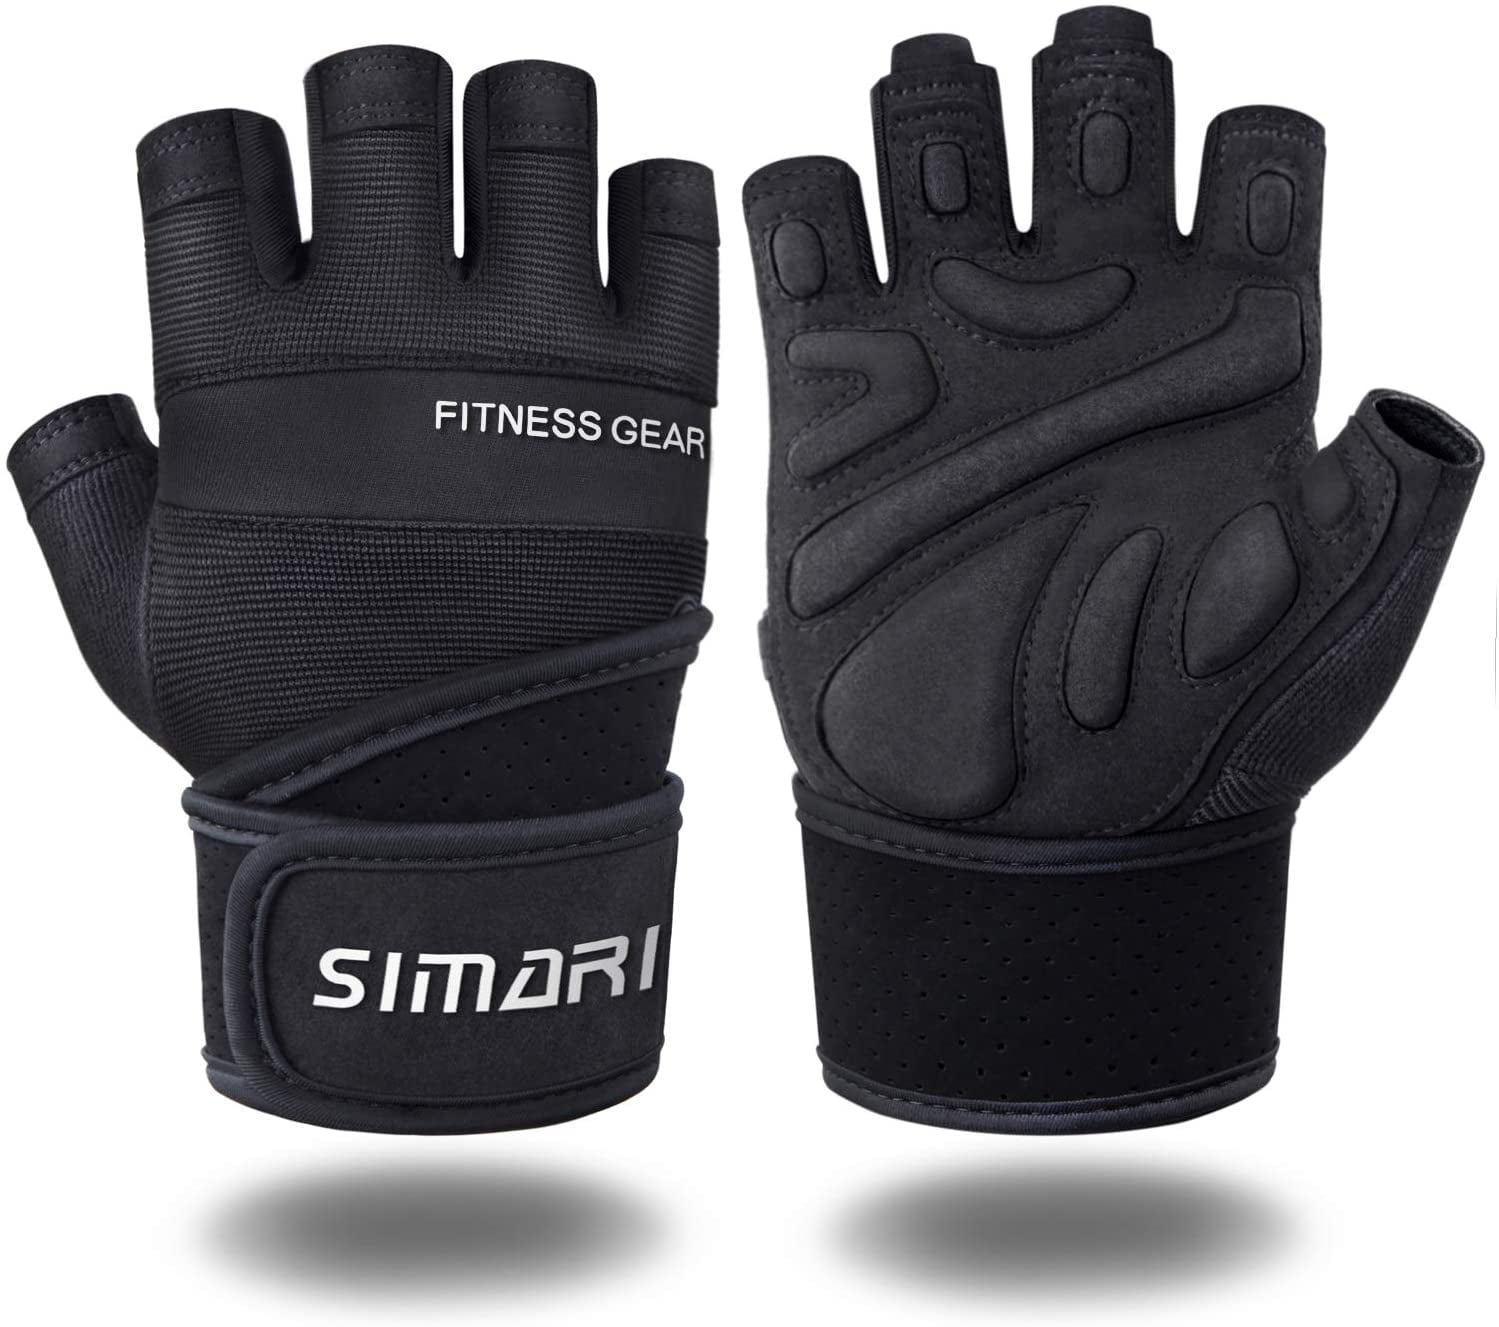 ChinFun Breathable Workout Gloves Weight Lifting Gloves for Men Women Anti-Slip Gym Fitness Gloves Full Palm Protection 